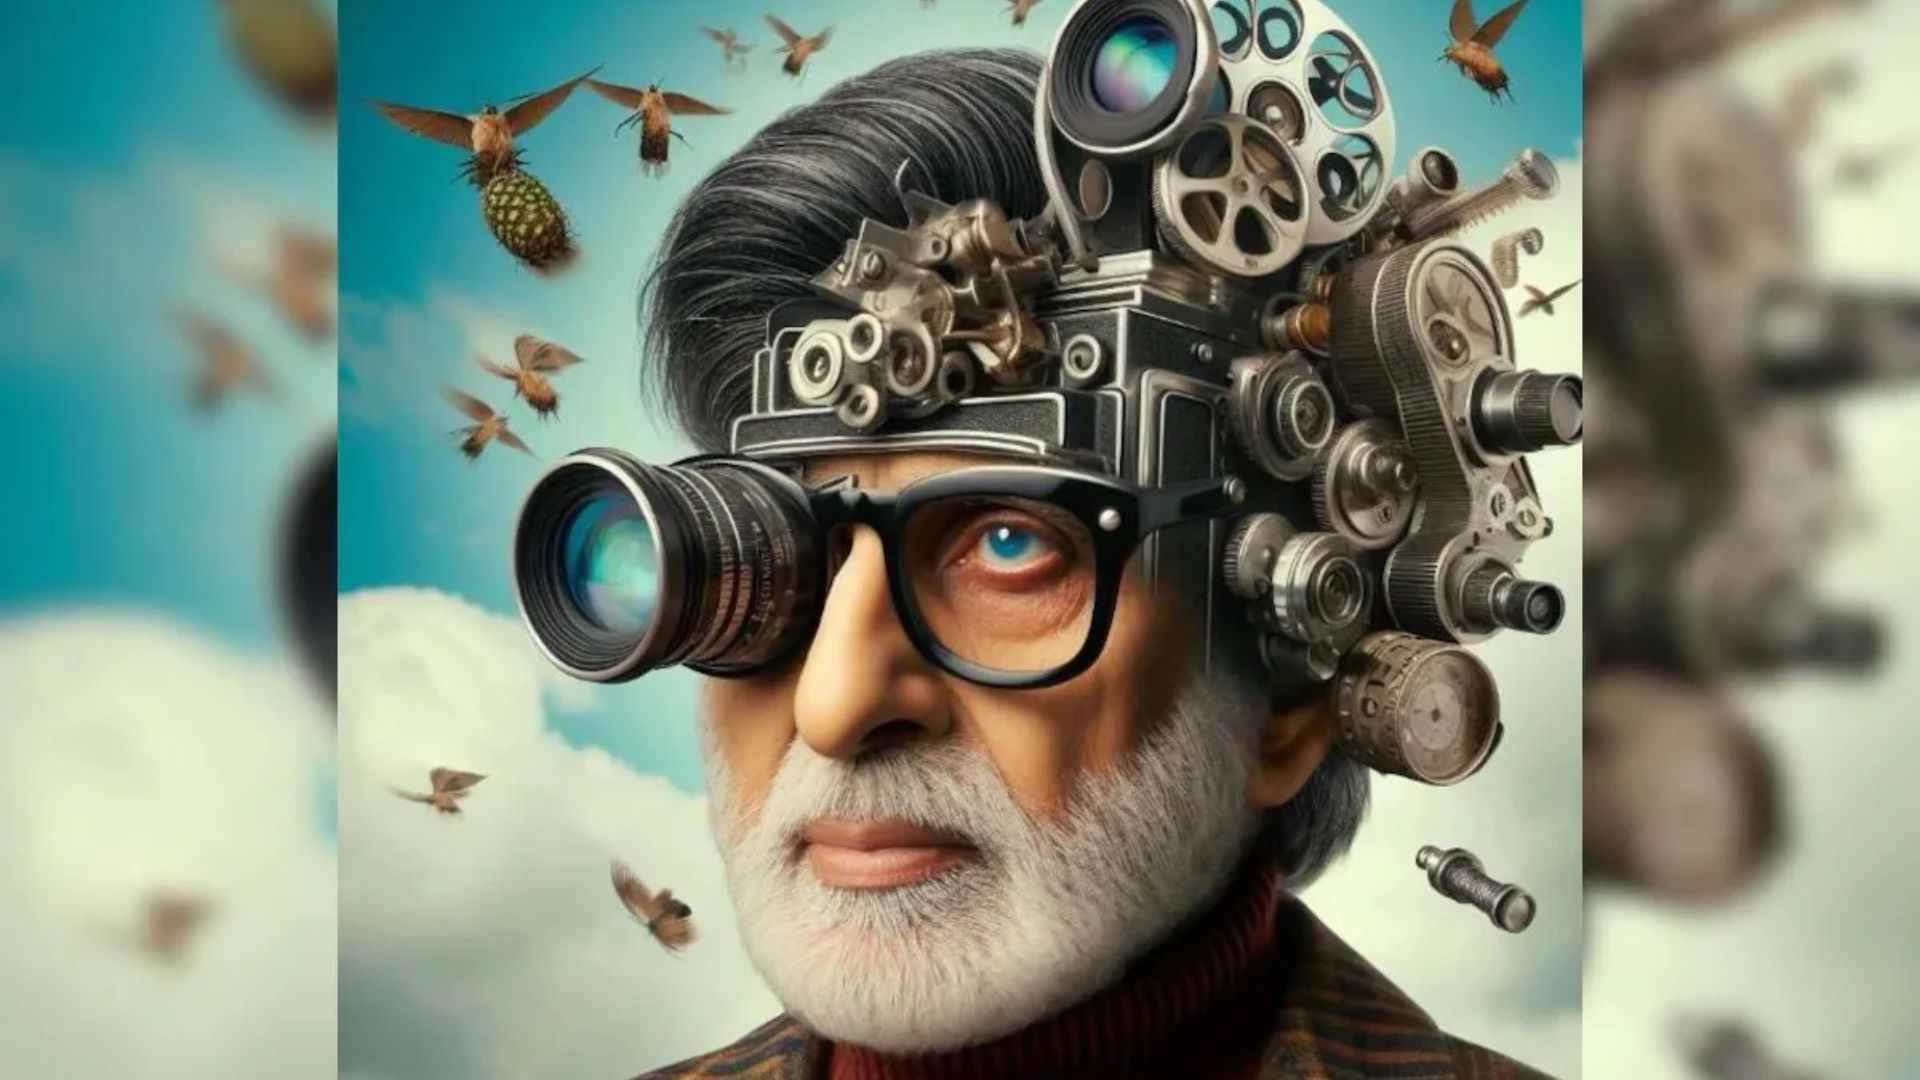 Amitabh Bachchan Celebrates 55 Years in Cinema with “Self-Made” AI Images; Daughter Shweta Reacts